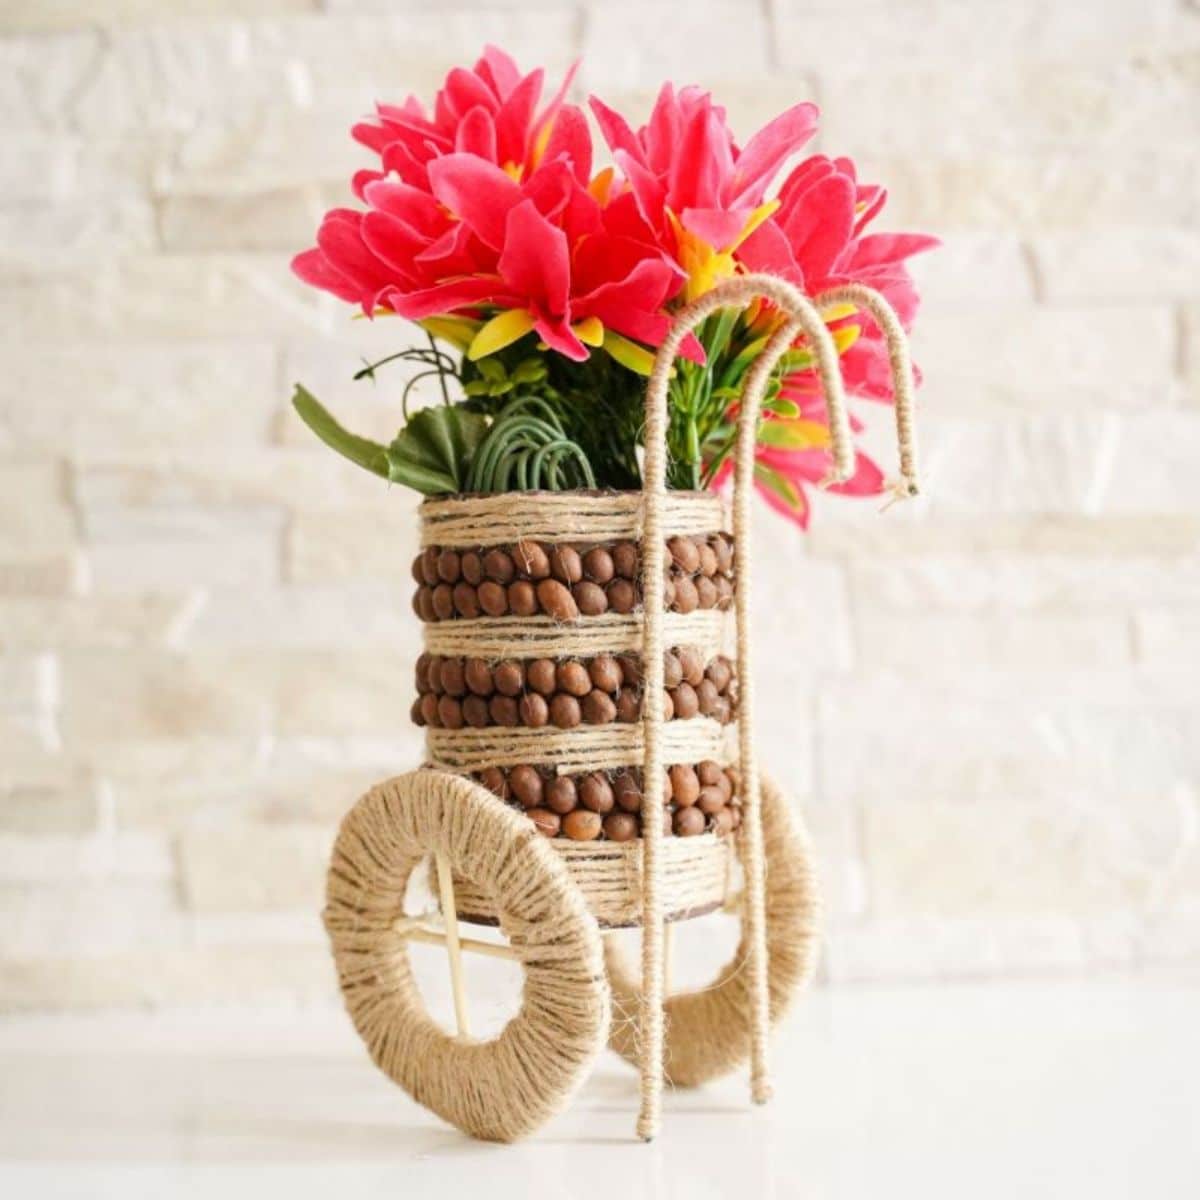 twine and coffee bean can with flowers by brick wall